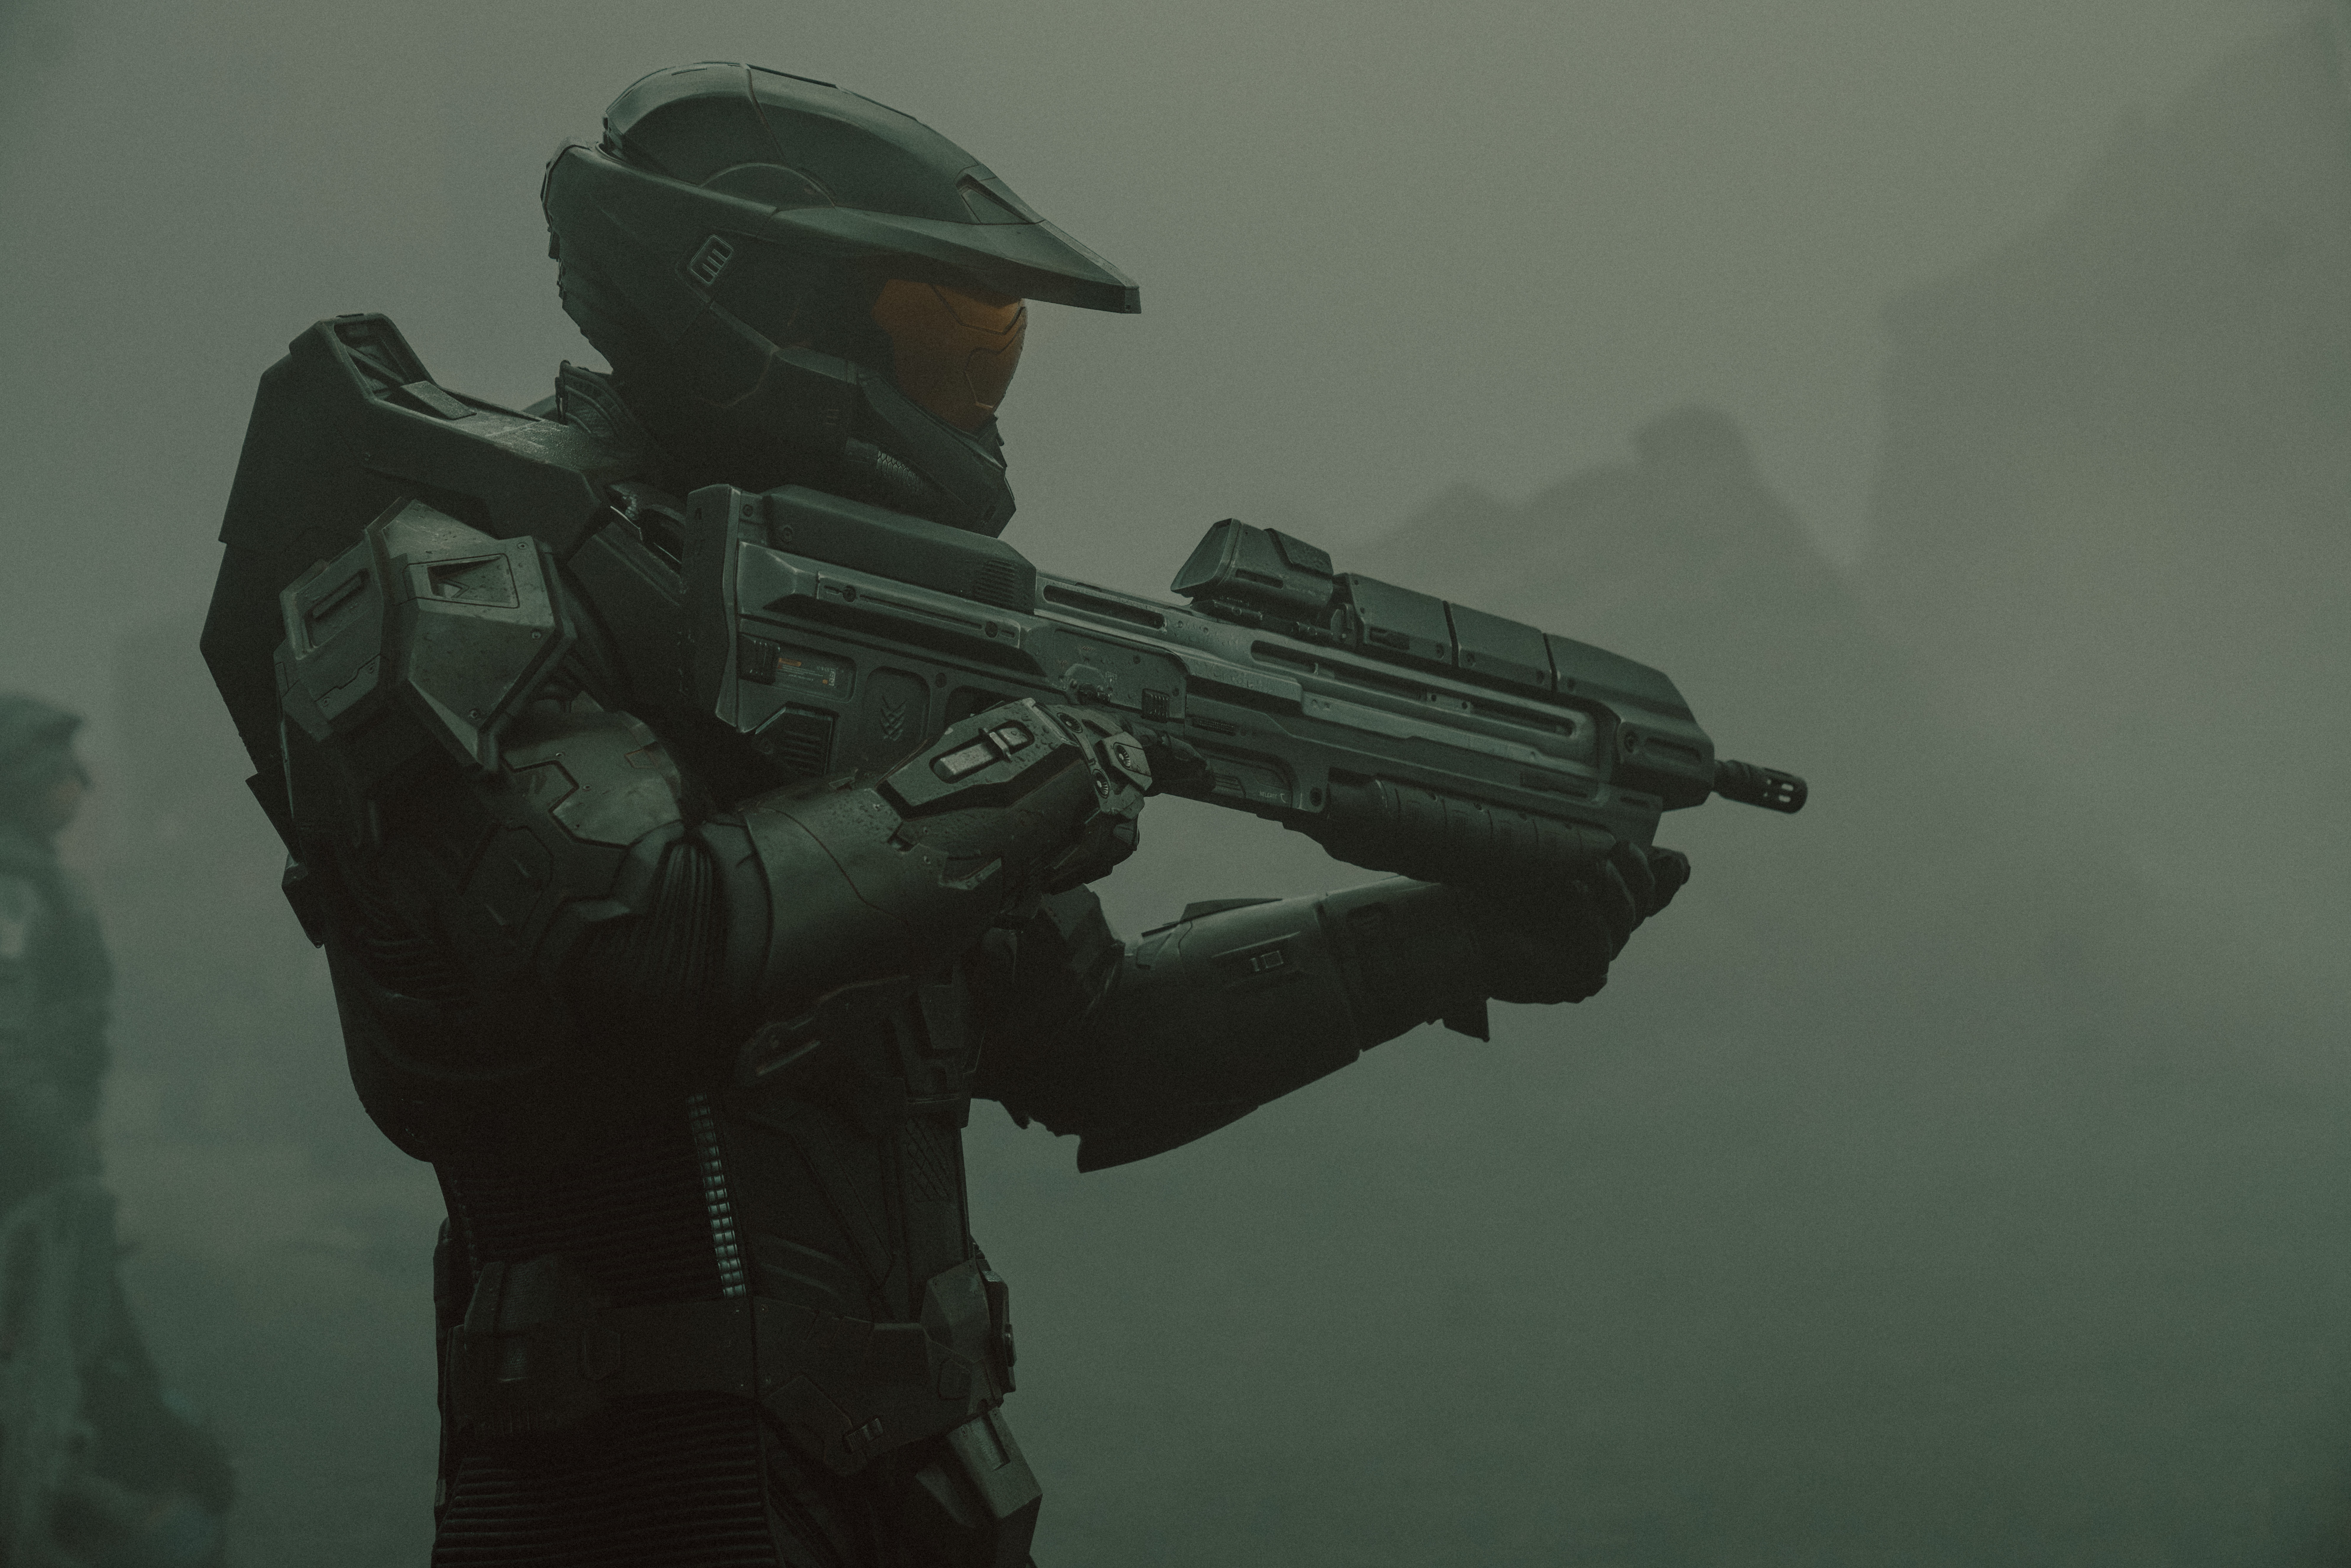 Master Chief (Pablo Schreiber) standing and holding his plasma rifle